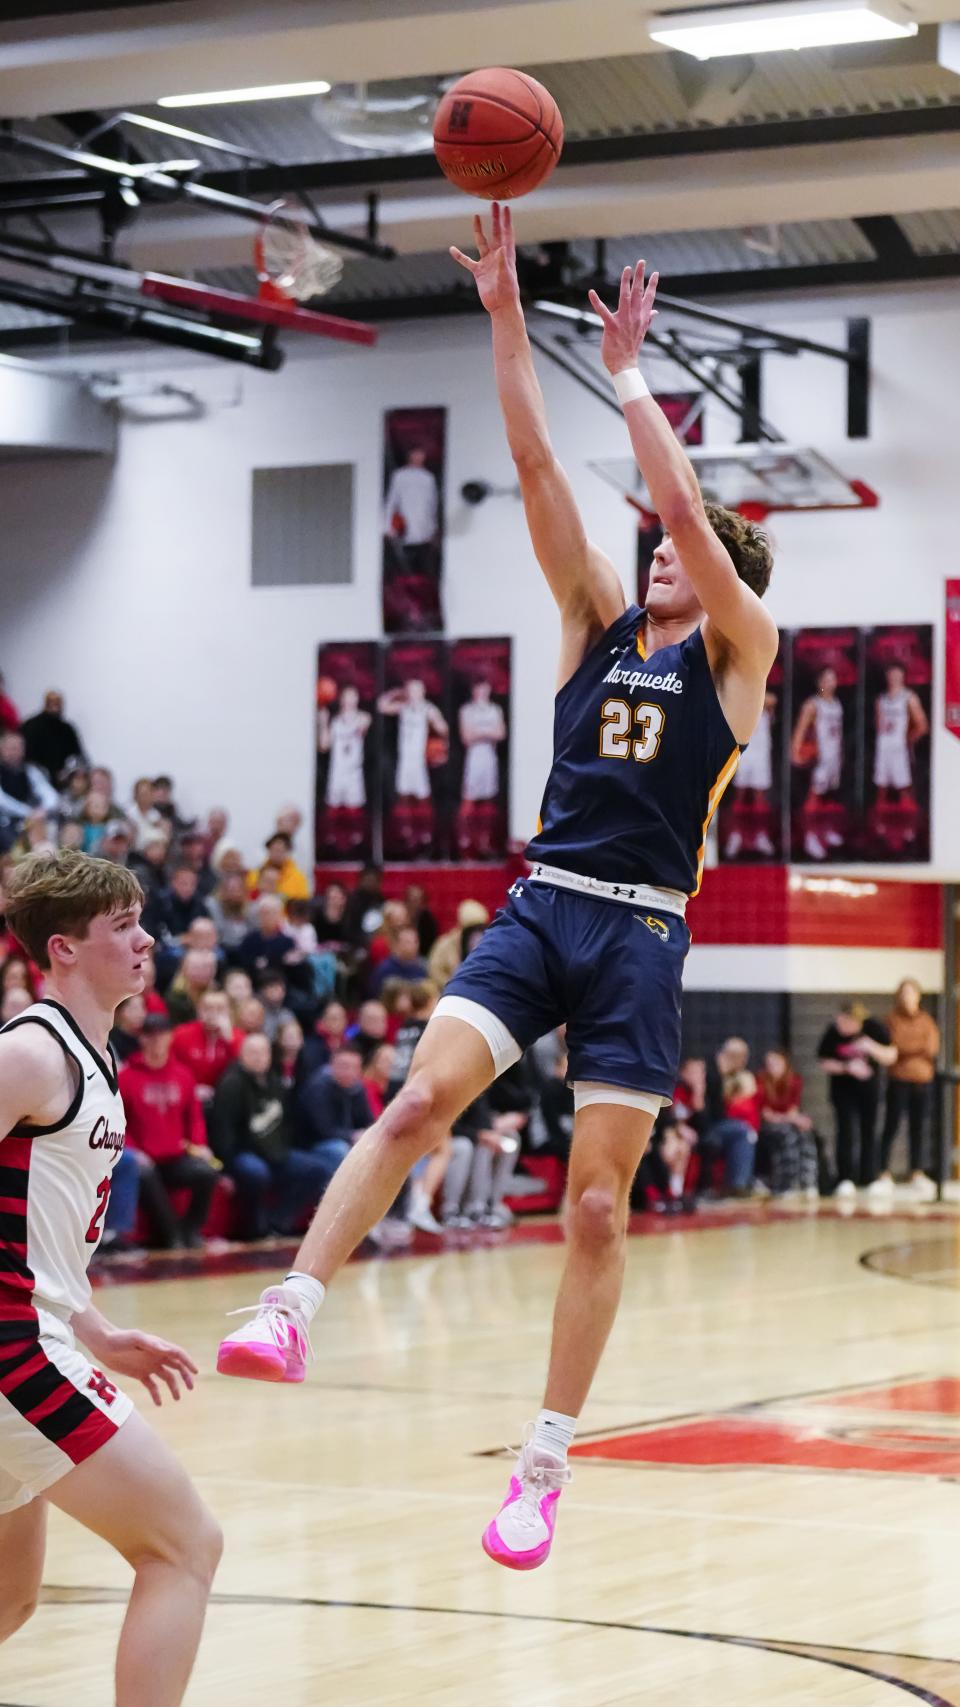 Leading scorer Nolan Minessale has helped Marquette reach a sectional semifinal matchup with Racine Case.